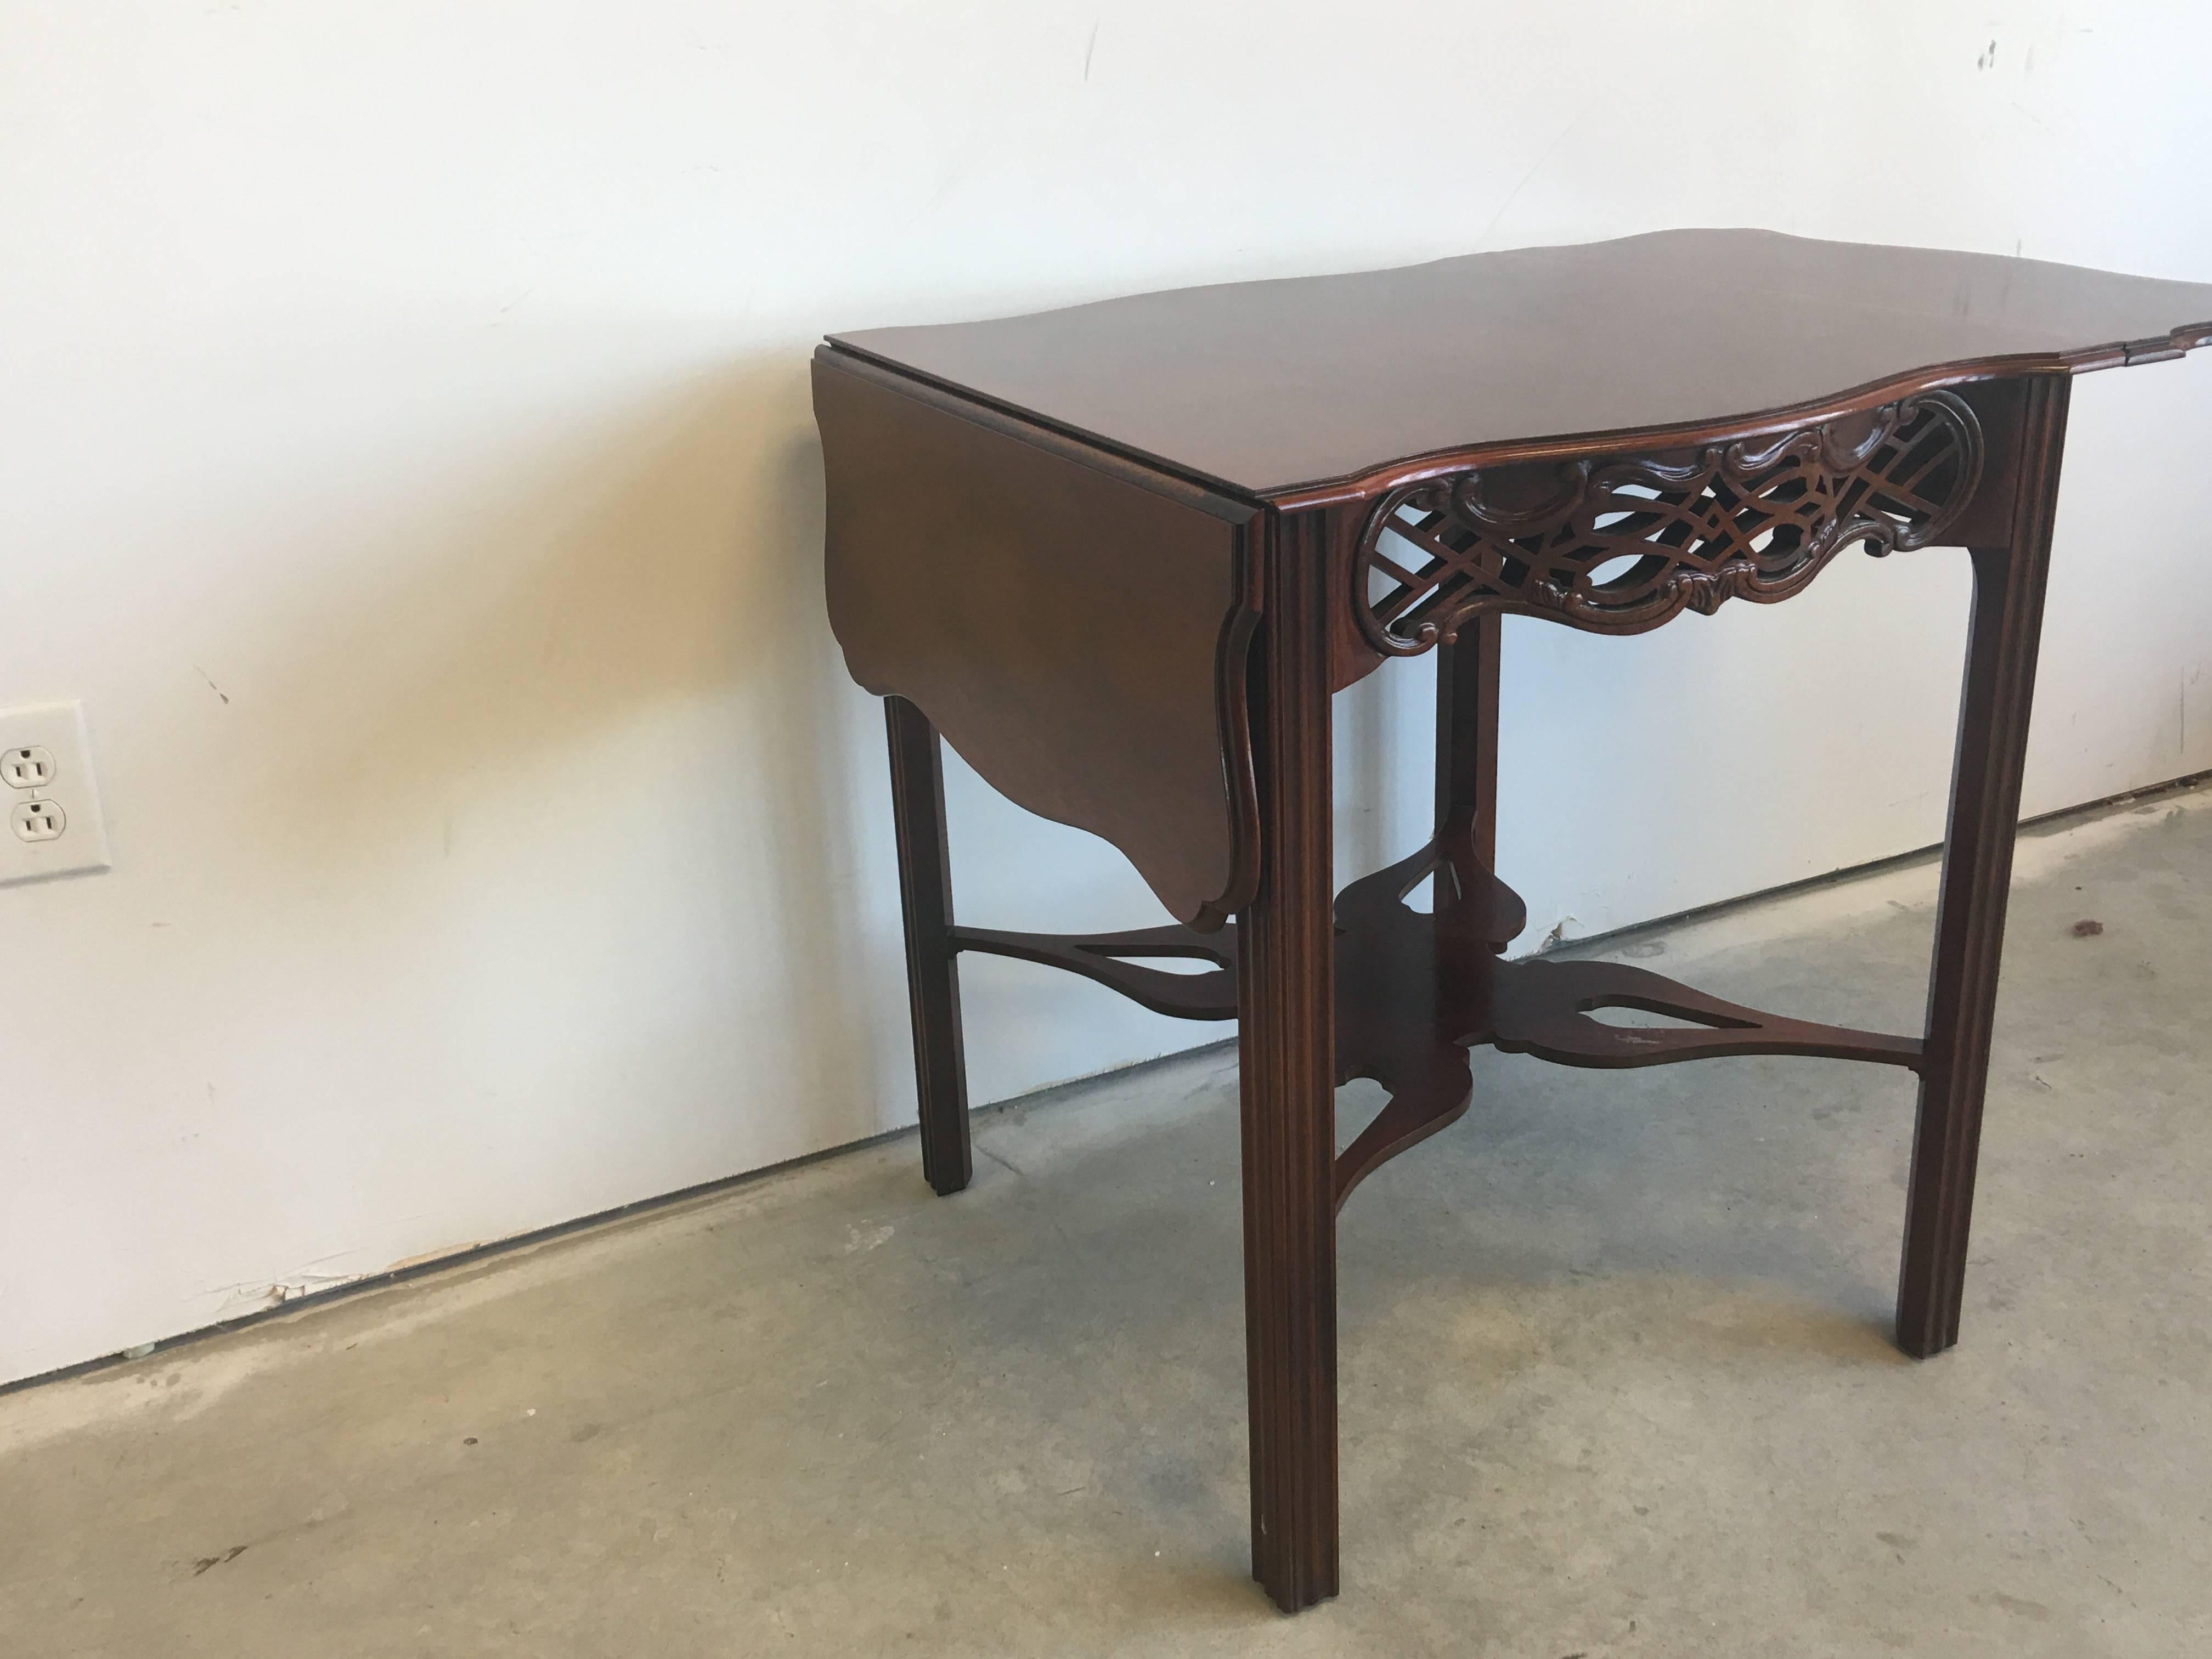 Offered is a stunning, 1960s Baker Furniture mahogany drop-leaf table tea table. Featuring drop-leaf sides and a serpentine top with intricately carved open fretwork frieze. Supported by straight chamfered legs and joined by butterfly stretchers.